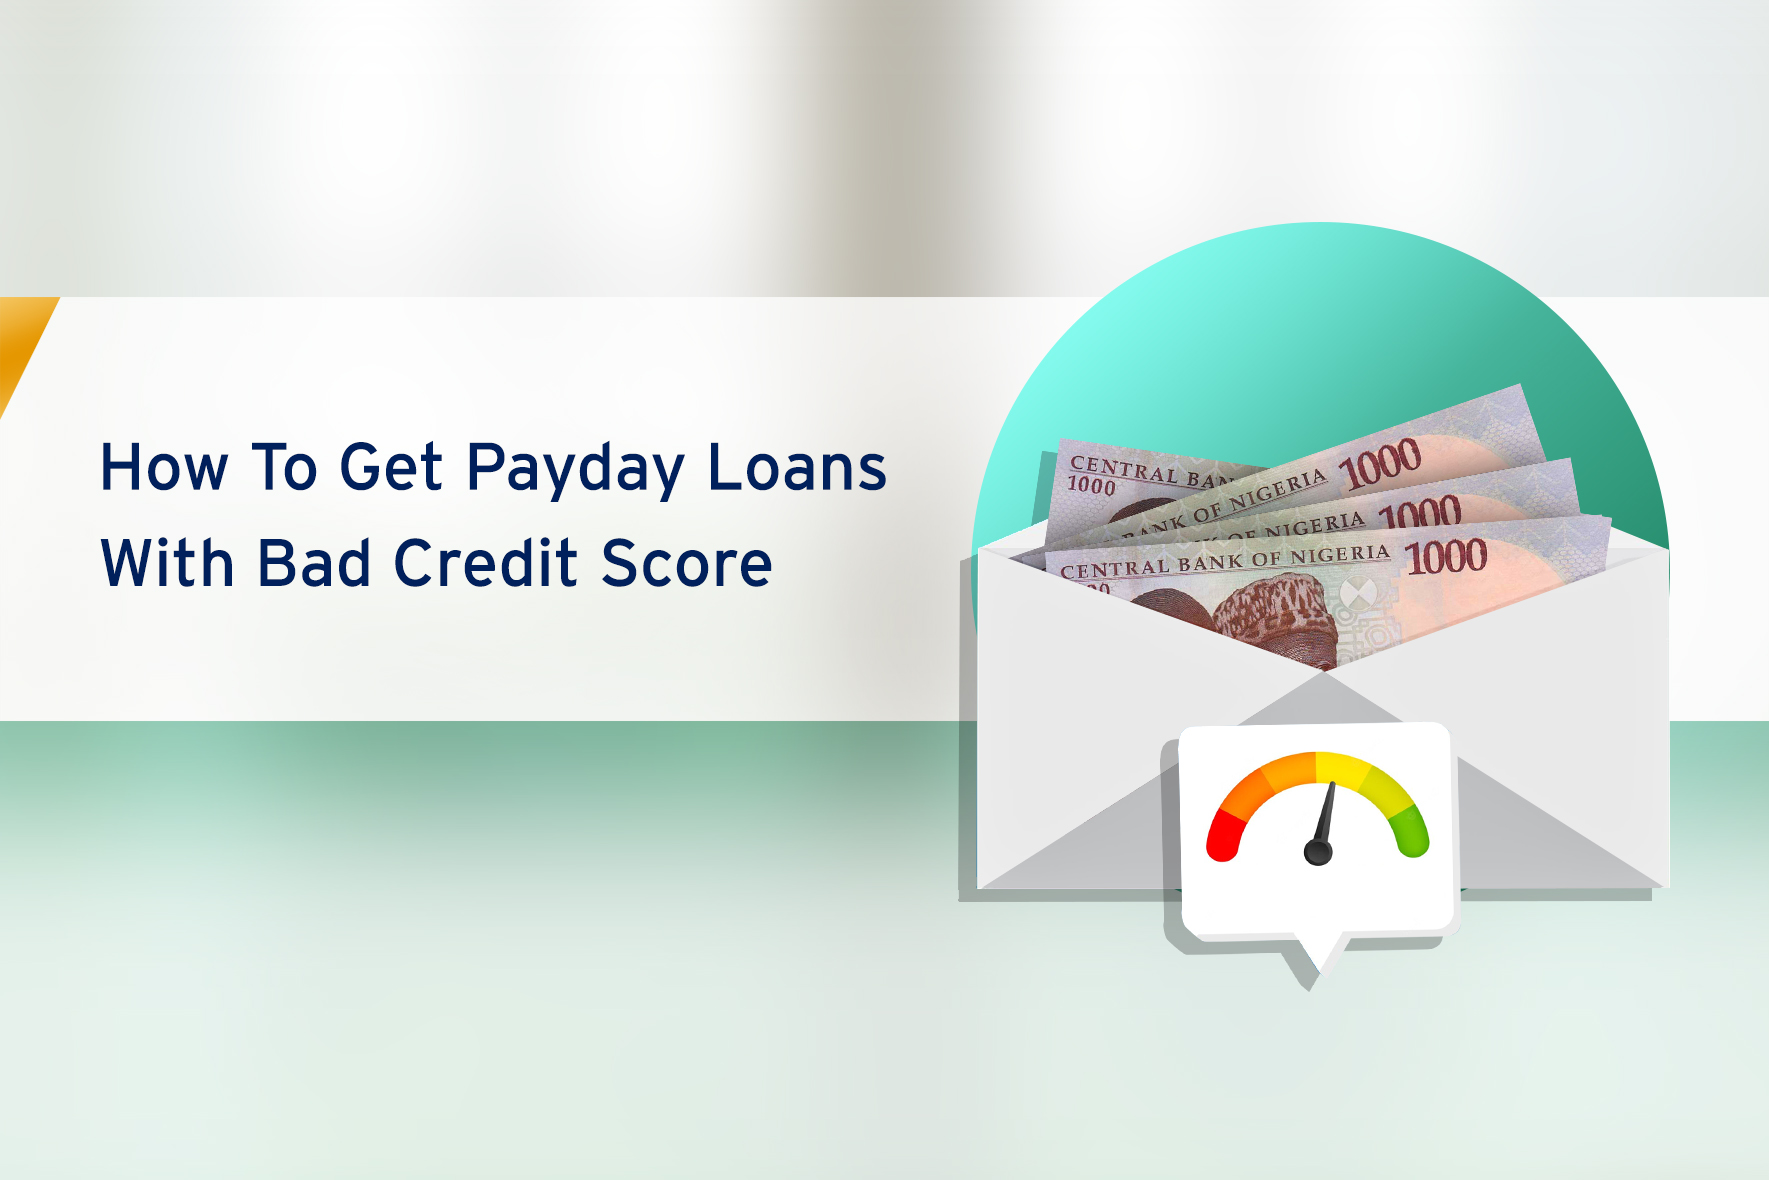 How to Get payday loans with a bad credit score